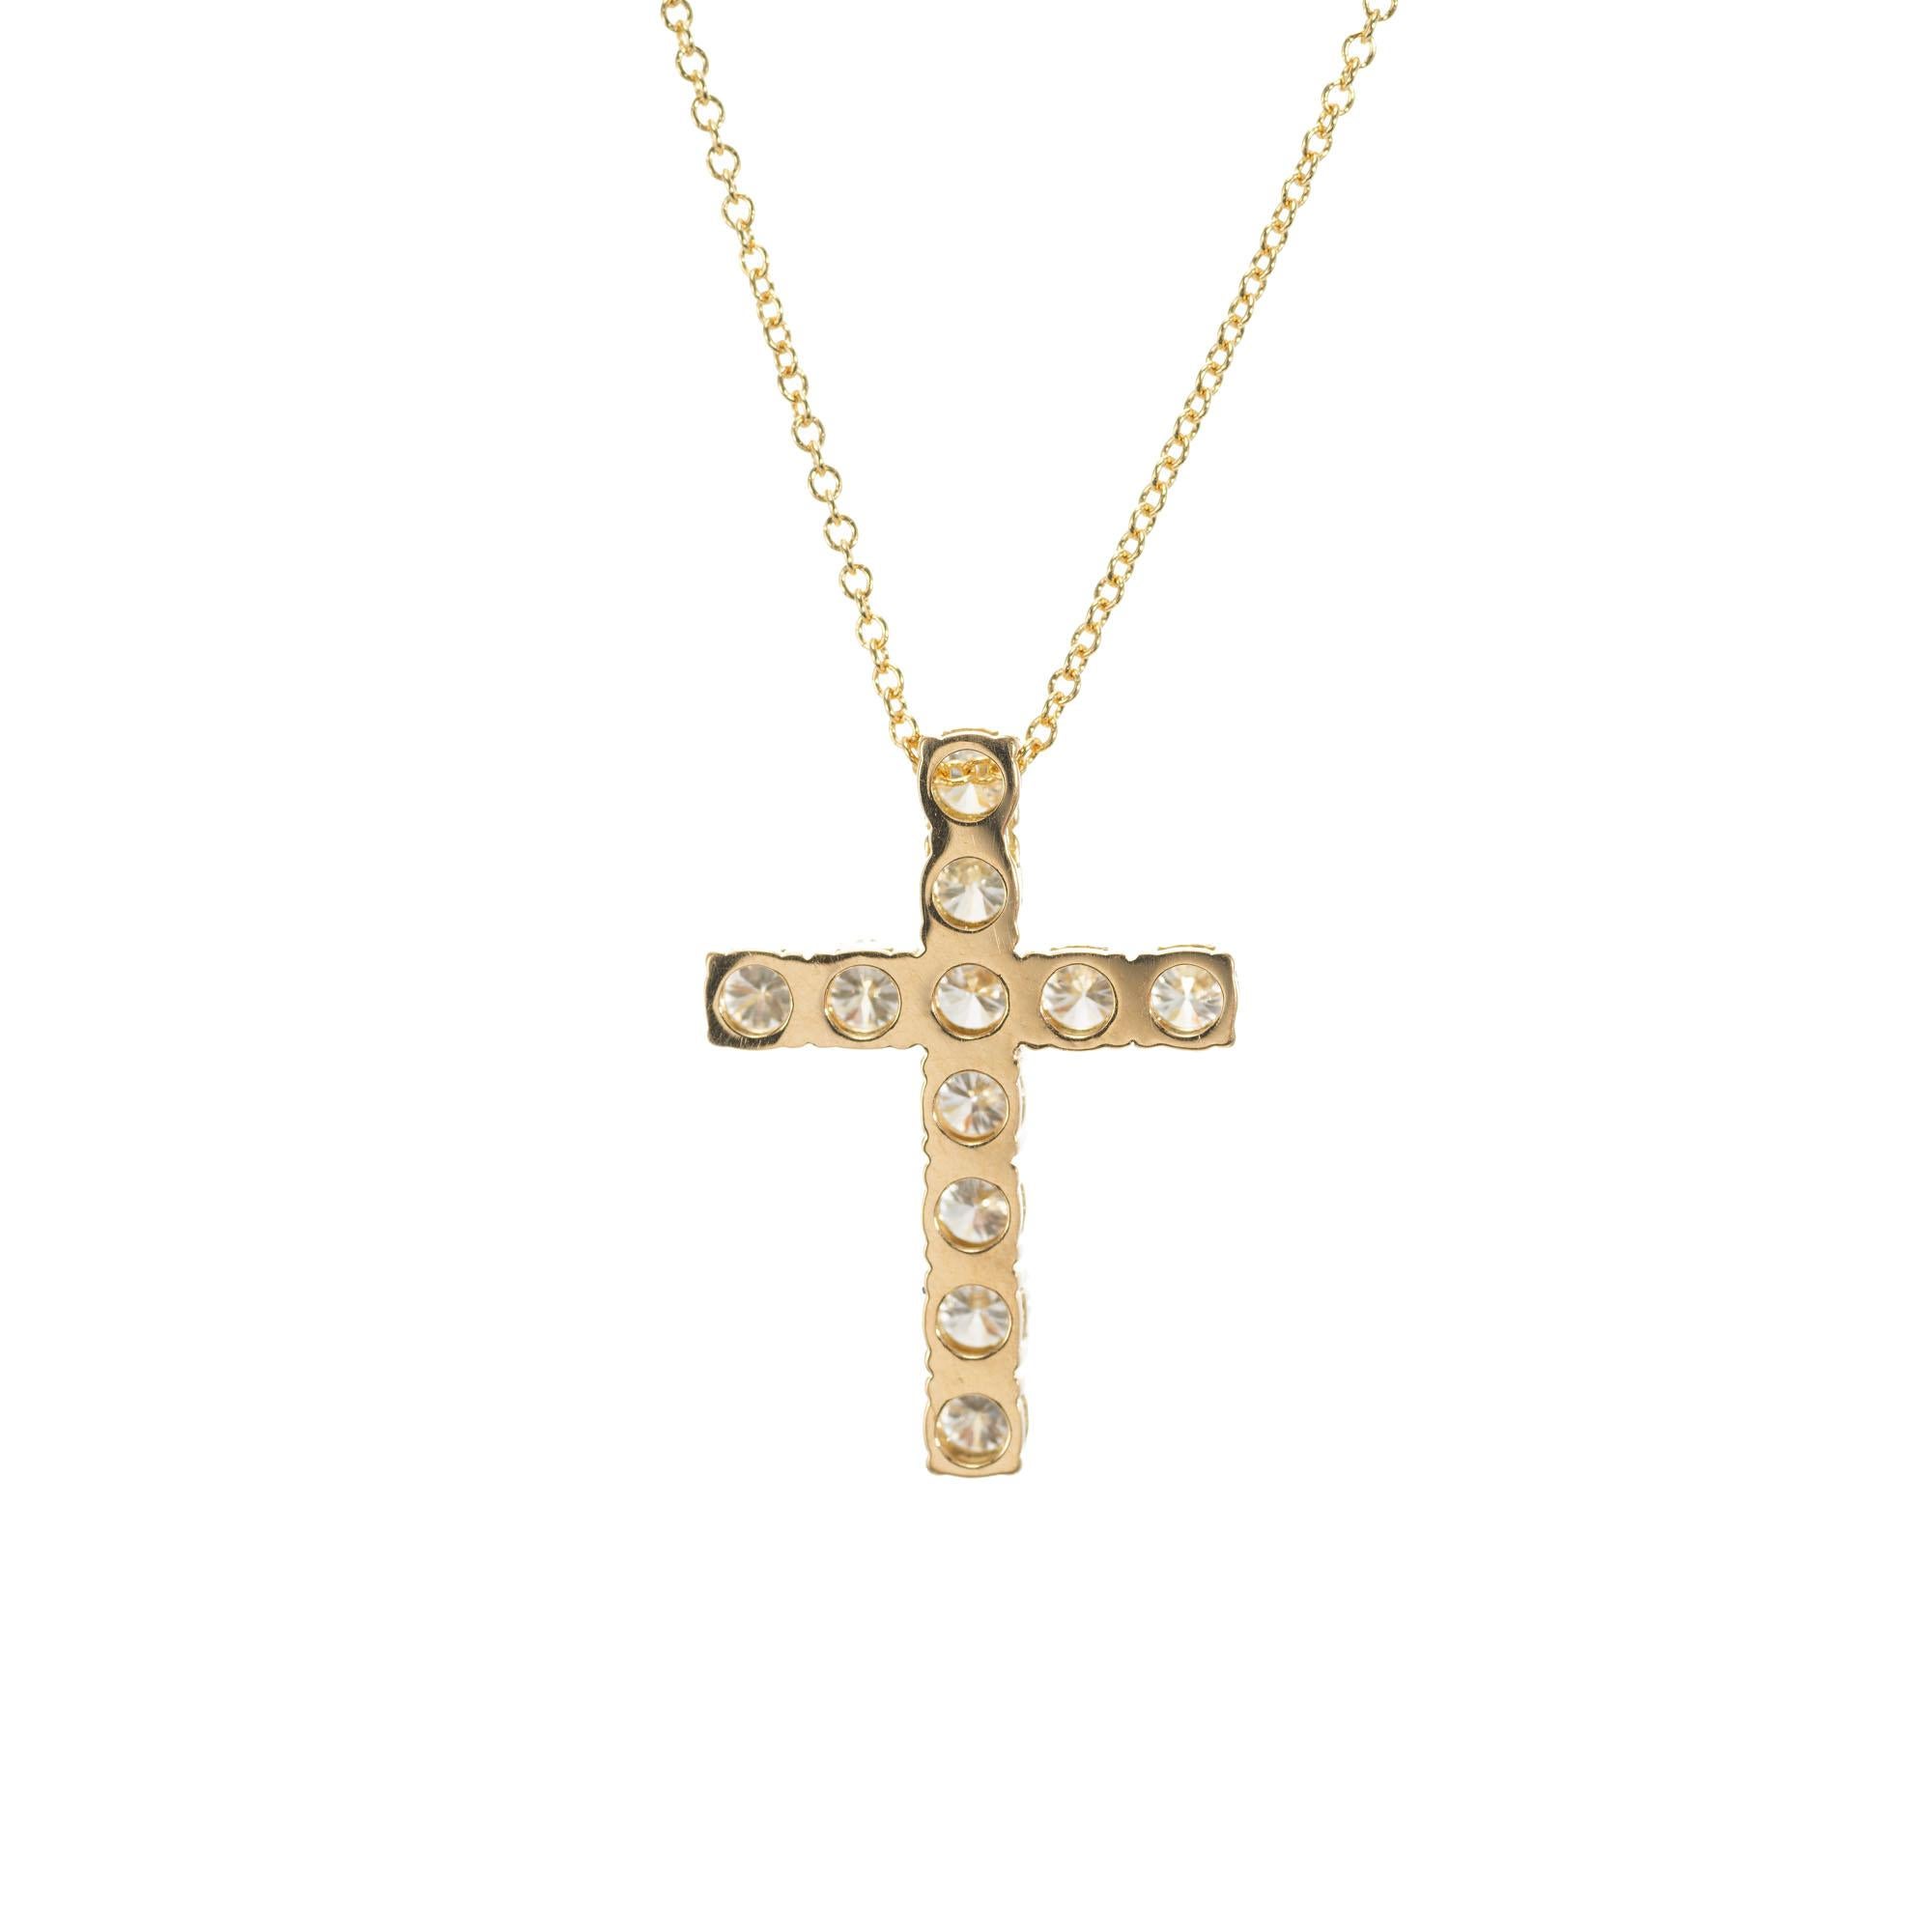 Peter Suchy custom made 18k yellow gold 1.15 carat round brilliant cut diamond cross. 18k Yellow gold.  18 inch chain. 

11 round brilliant cut diamonds F-G VS, approx. 1.15cts
18k yellow gold 
Stamped: 18k ITALY 
3.5 grams
Top to bottom: 22.15mm or